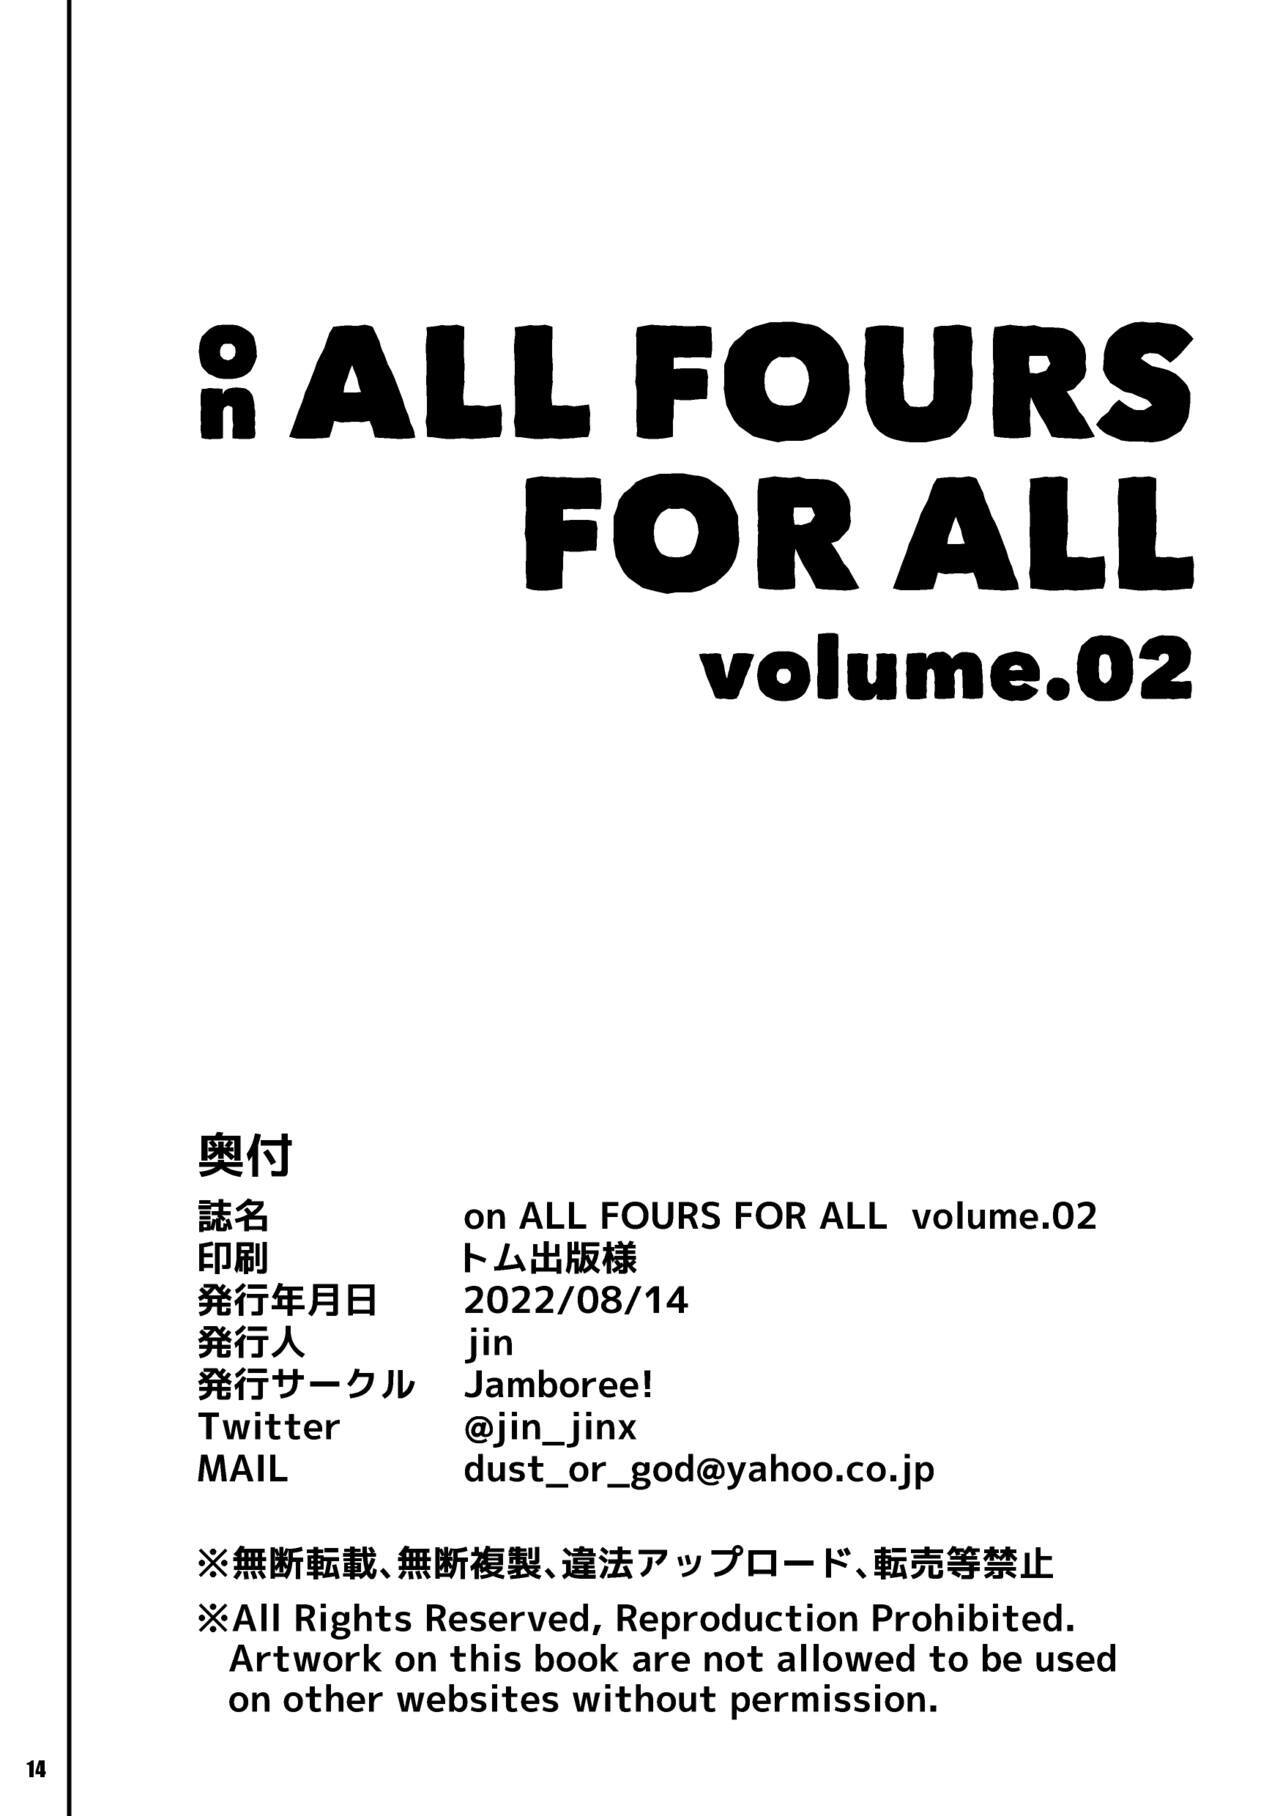 [Jamboree! (jin)] ON ALL FOURS FOR ALL volume.02 [Chinese] [小紅個人漢化] [Jamboree! (jin)] ON ALL FOURS FOR ALL volume.02 [中文翻譯]